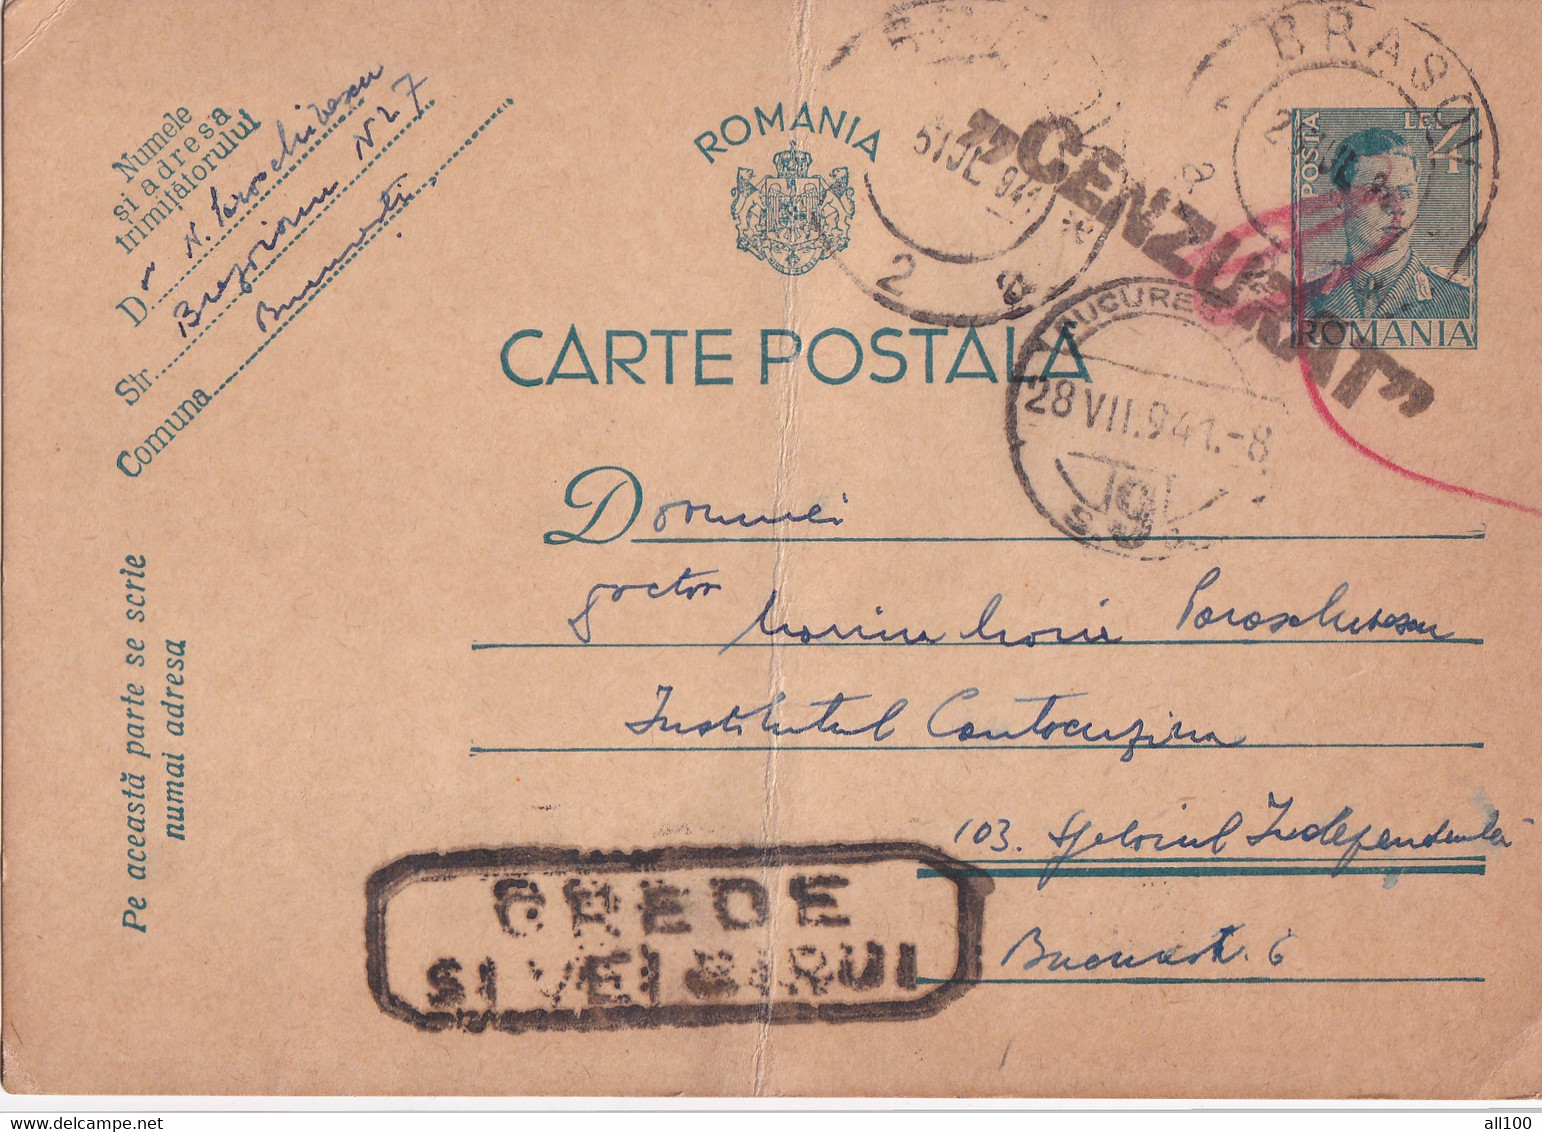 A16458 - MILITARY LETTER ROMANIA POSTAL STATIONERY CENZORED BRASOV  CREDE SI VEI BIRUI STAMPEL  KING MICHAEL 4 LEI 1941 - World War 2 Letters